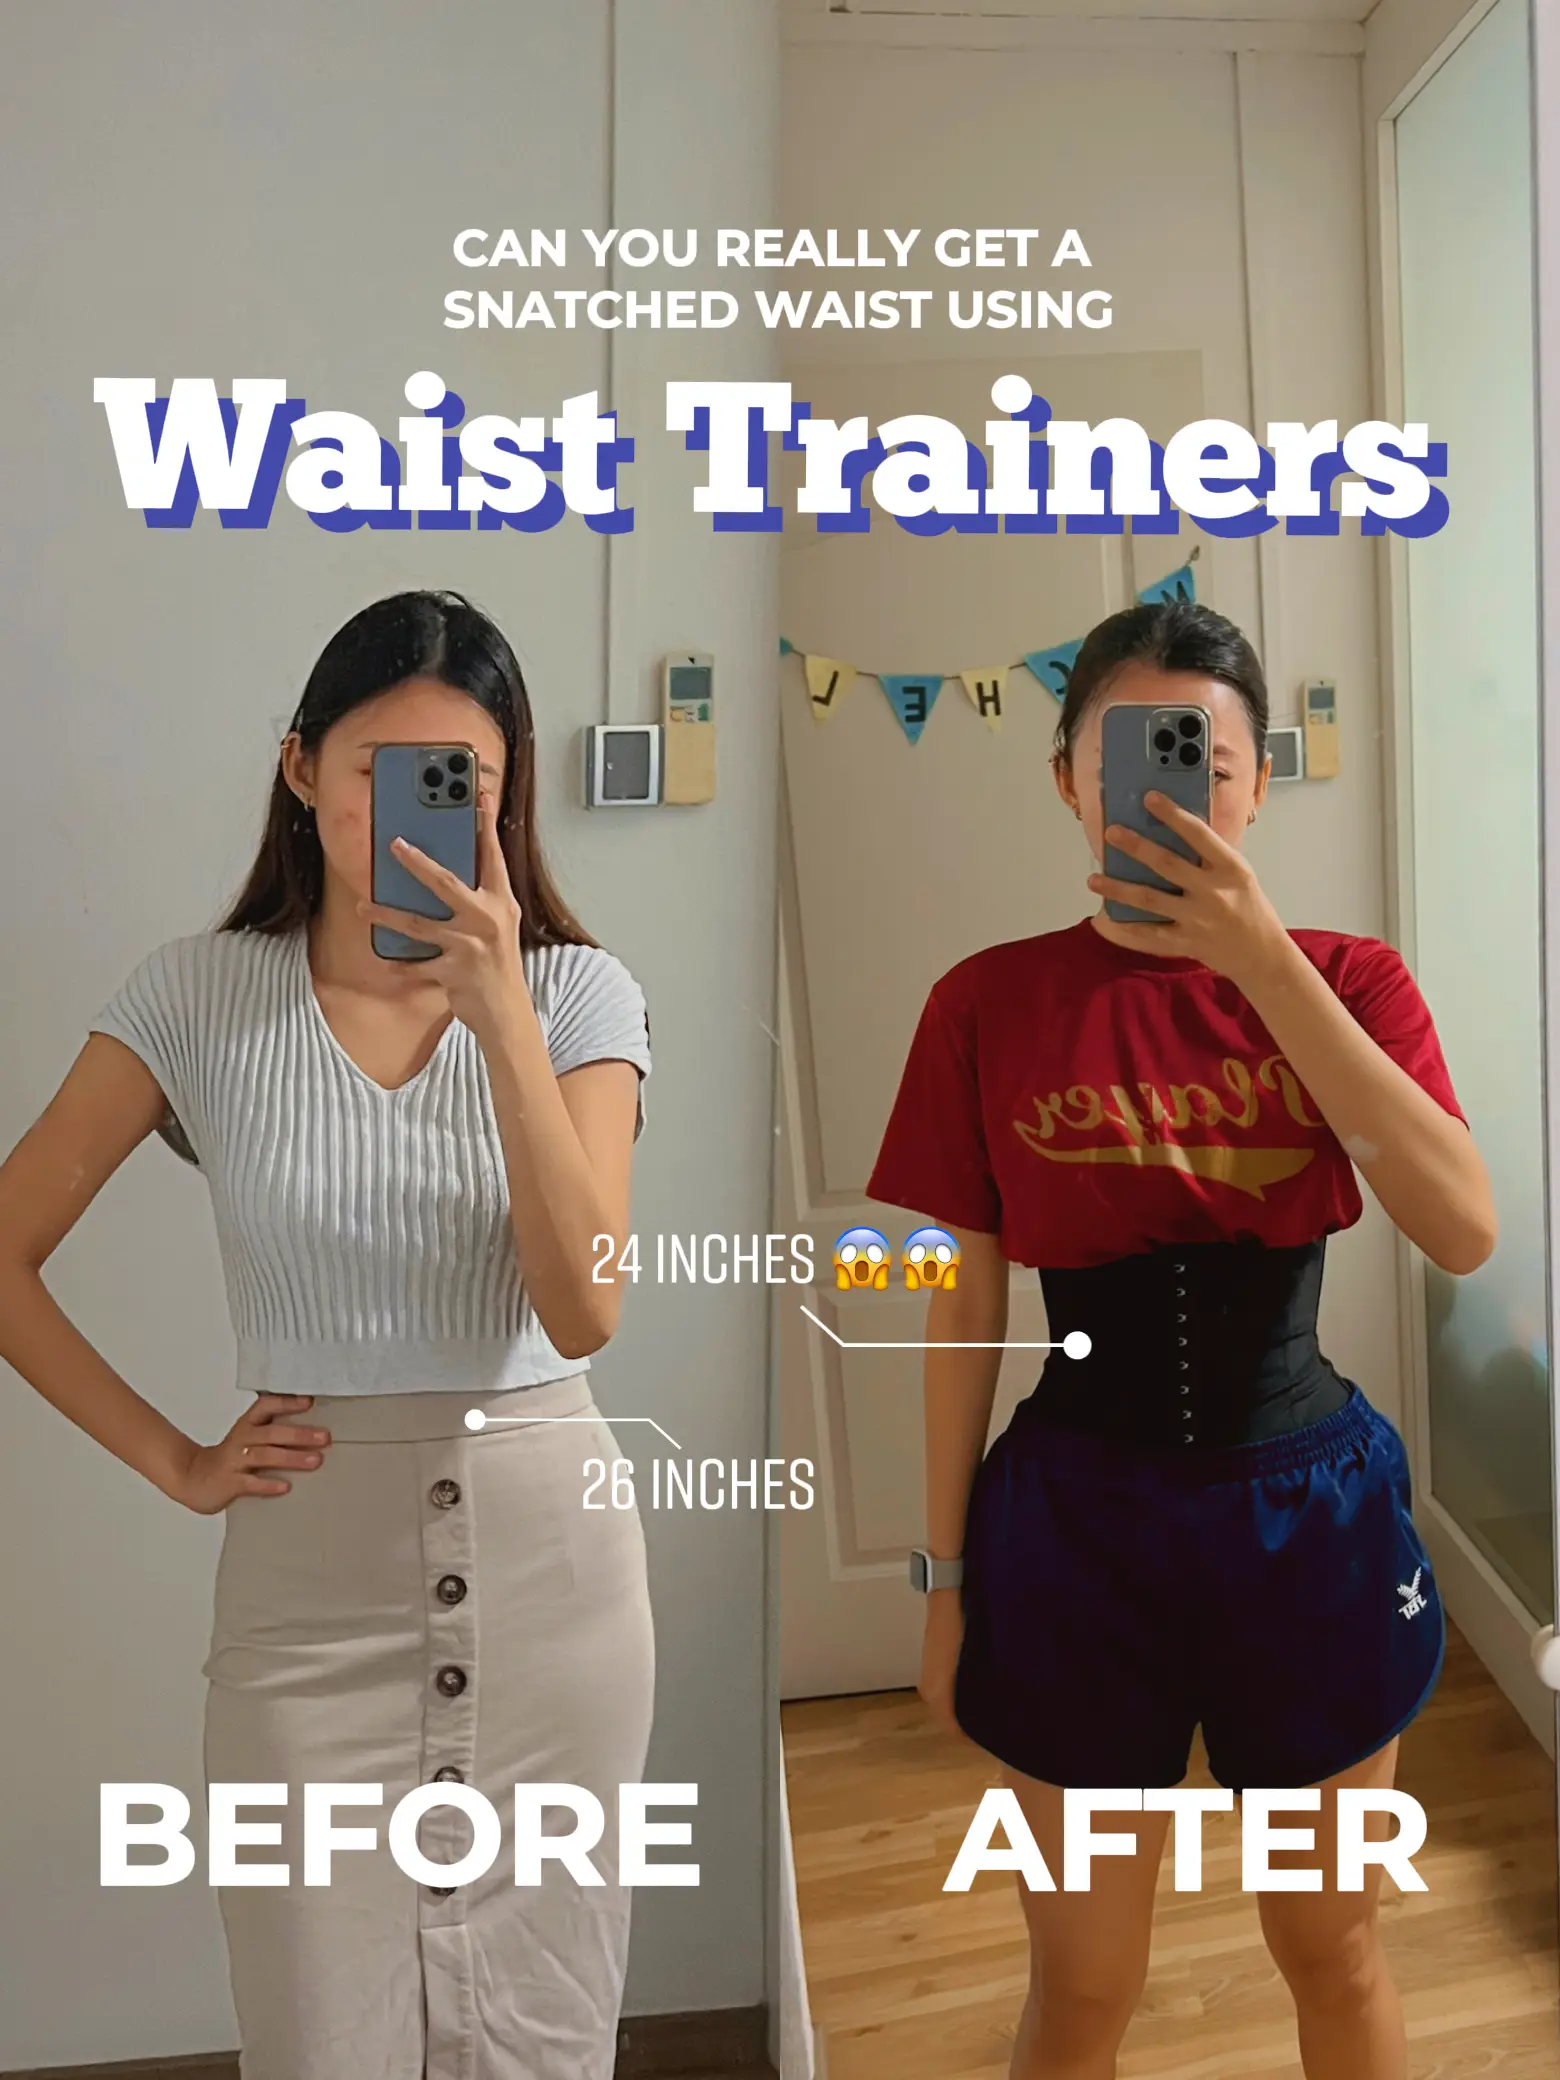 How to Get a Snatched Waist